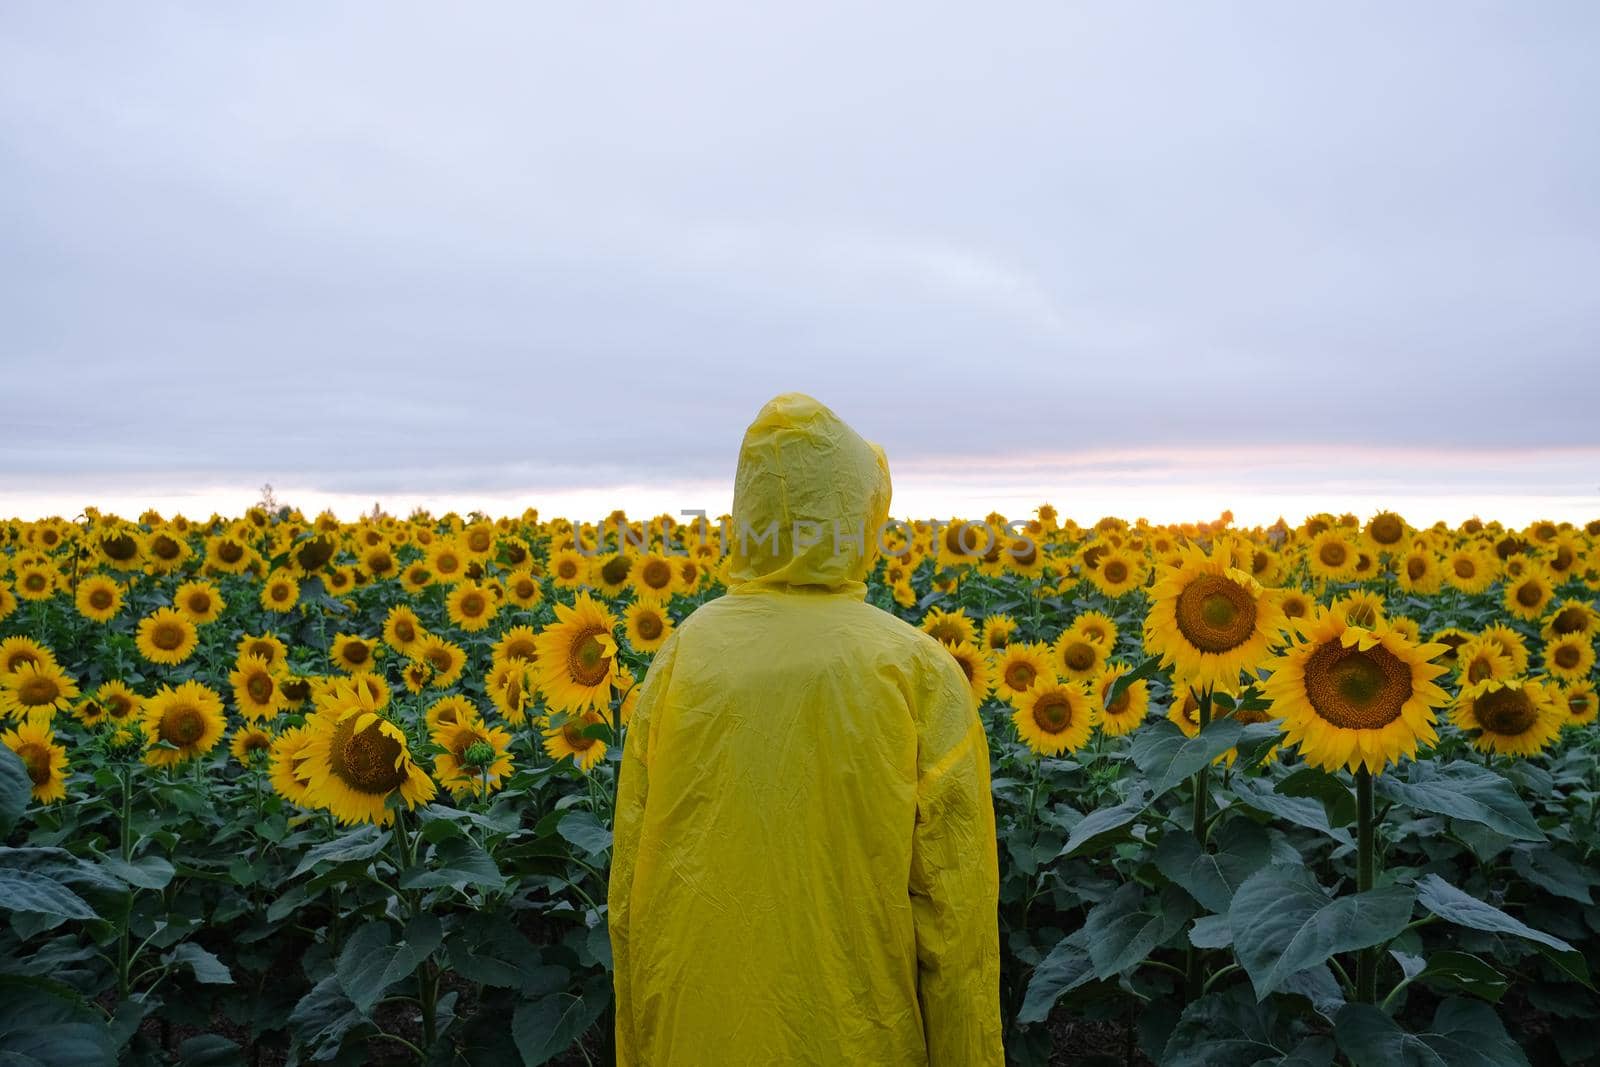 Human in yellow hood raincoat standing in sunflower field. by Gleaminvisible